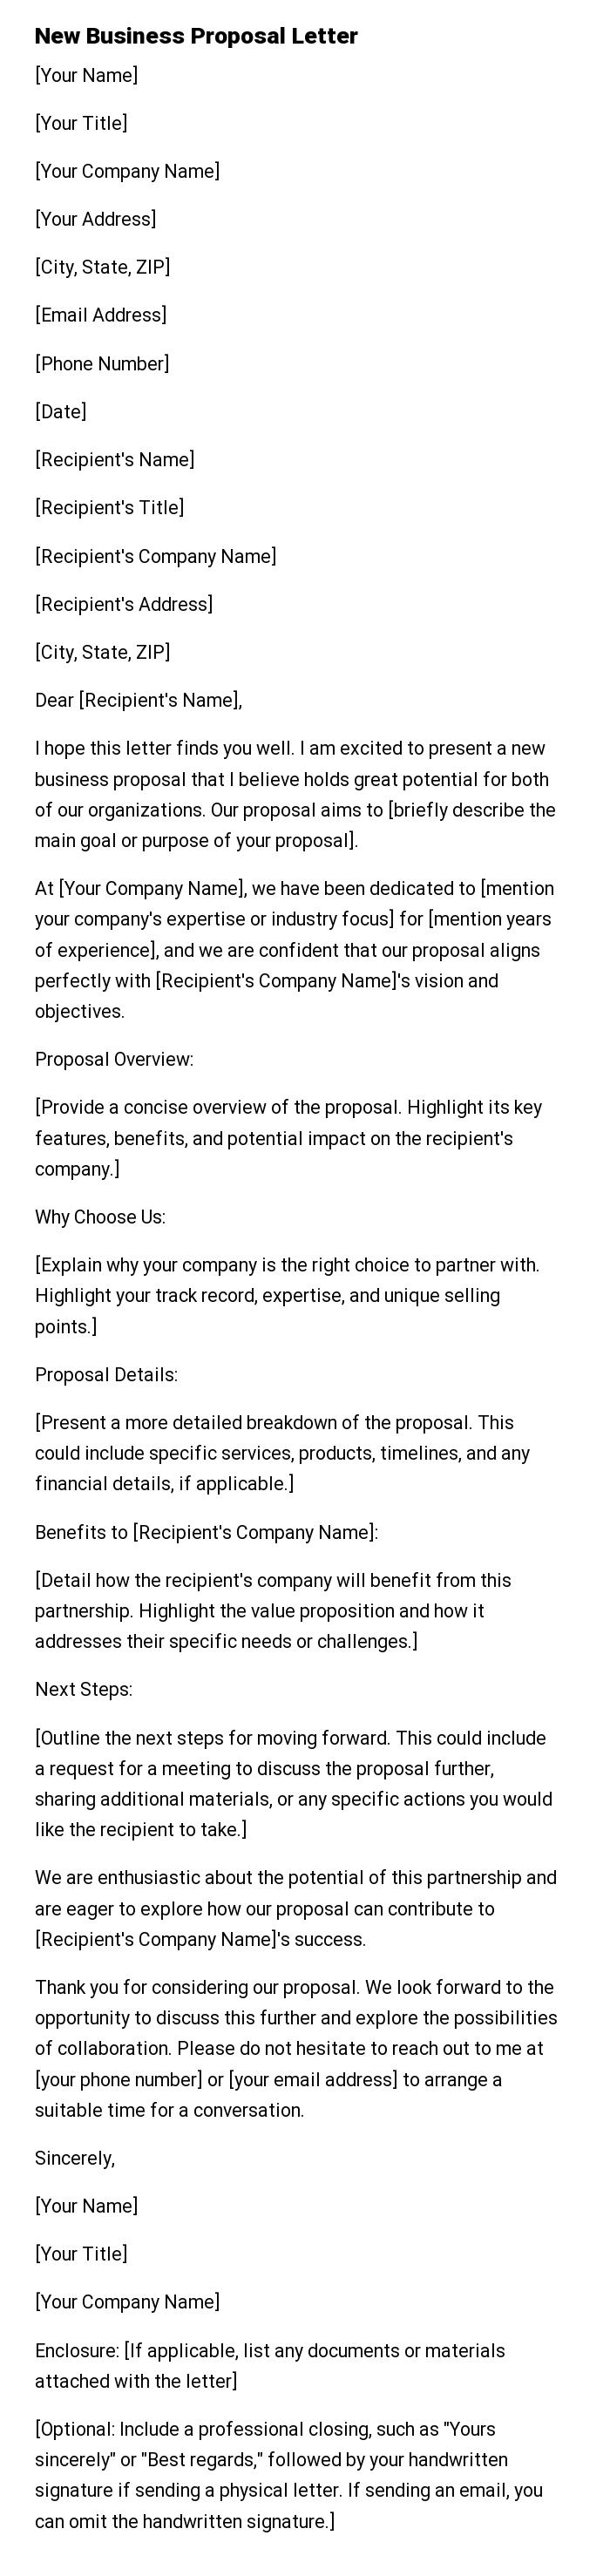 New Business Proposal Letter